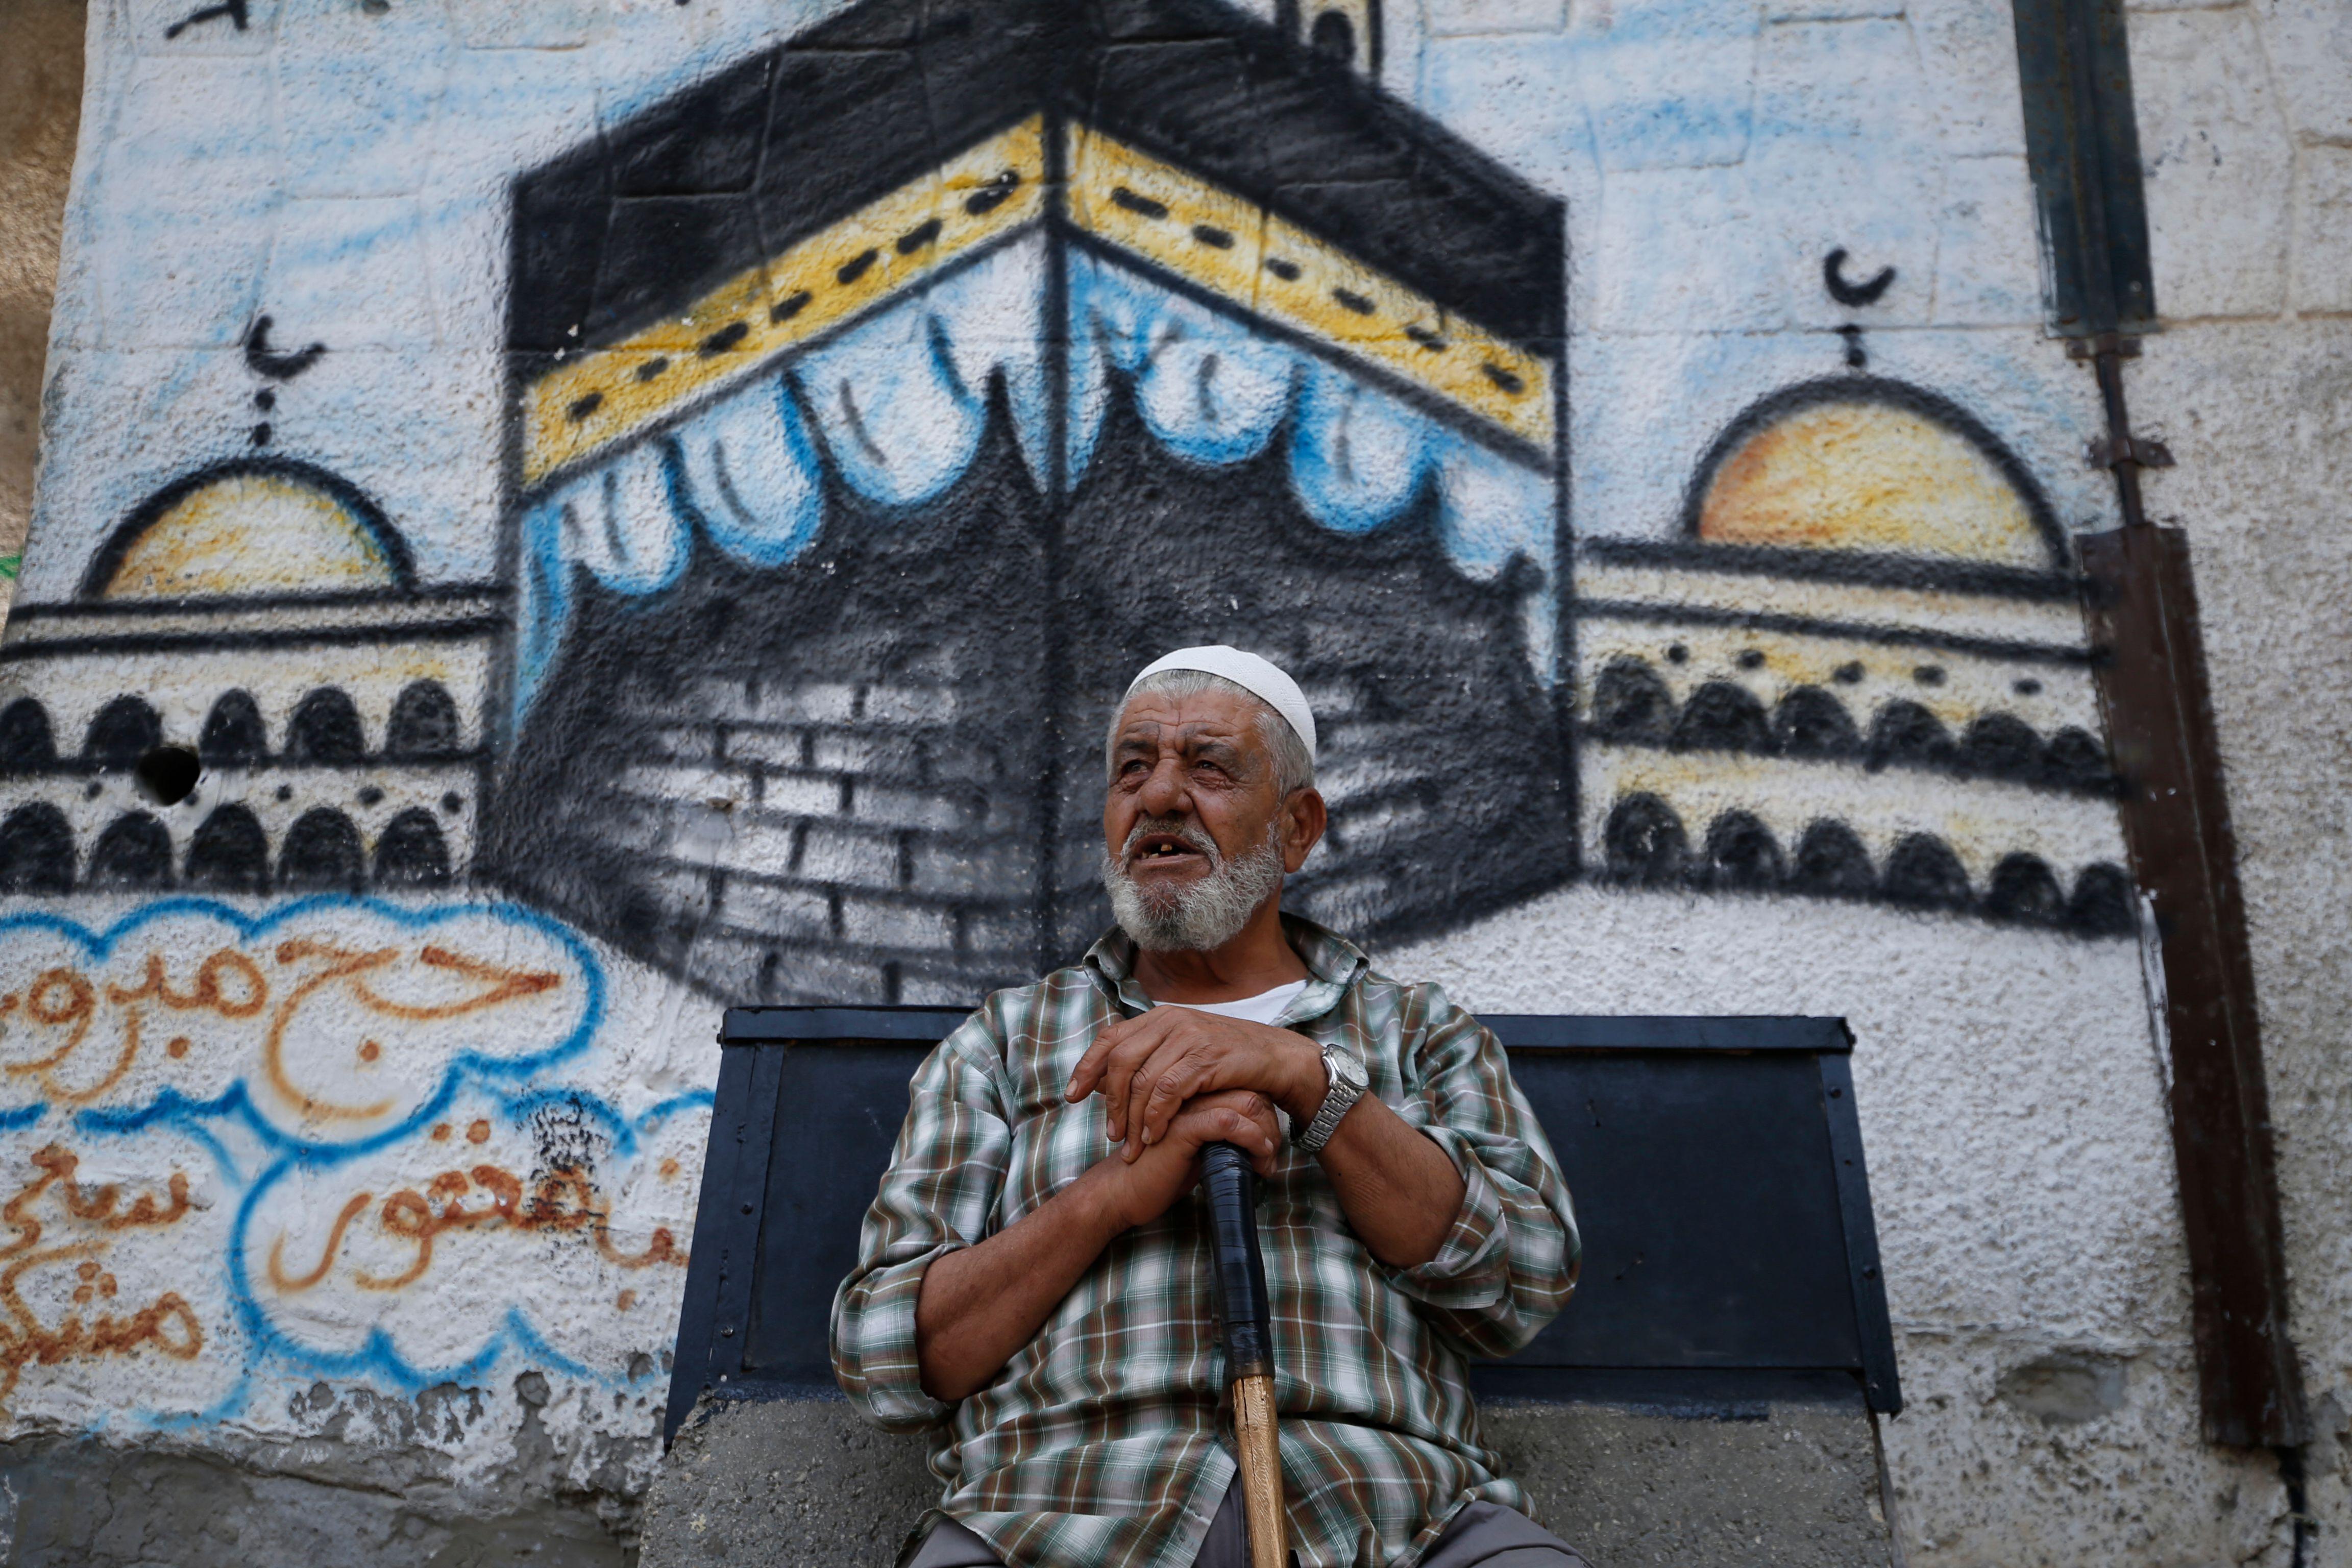 An elderly Palestinian man sits in front of a mural depicting the Kaaba.